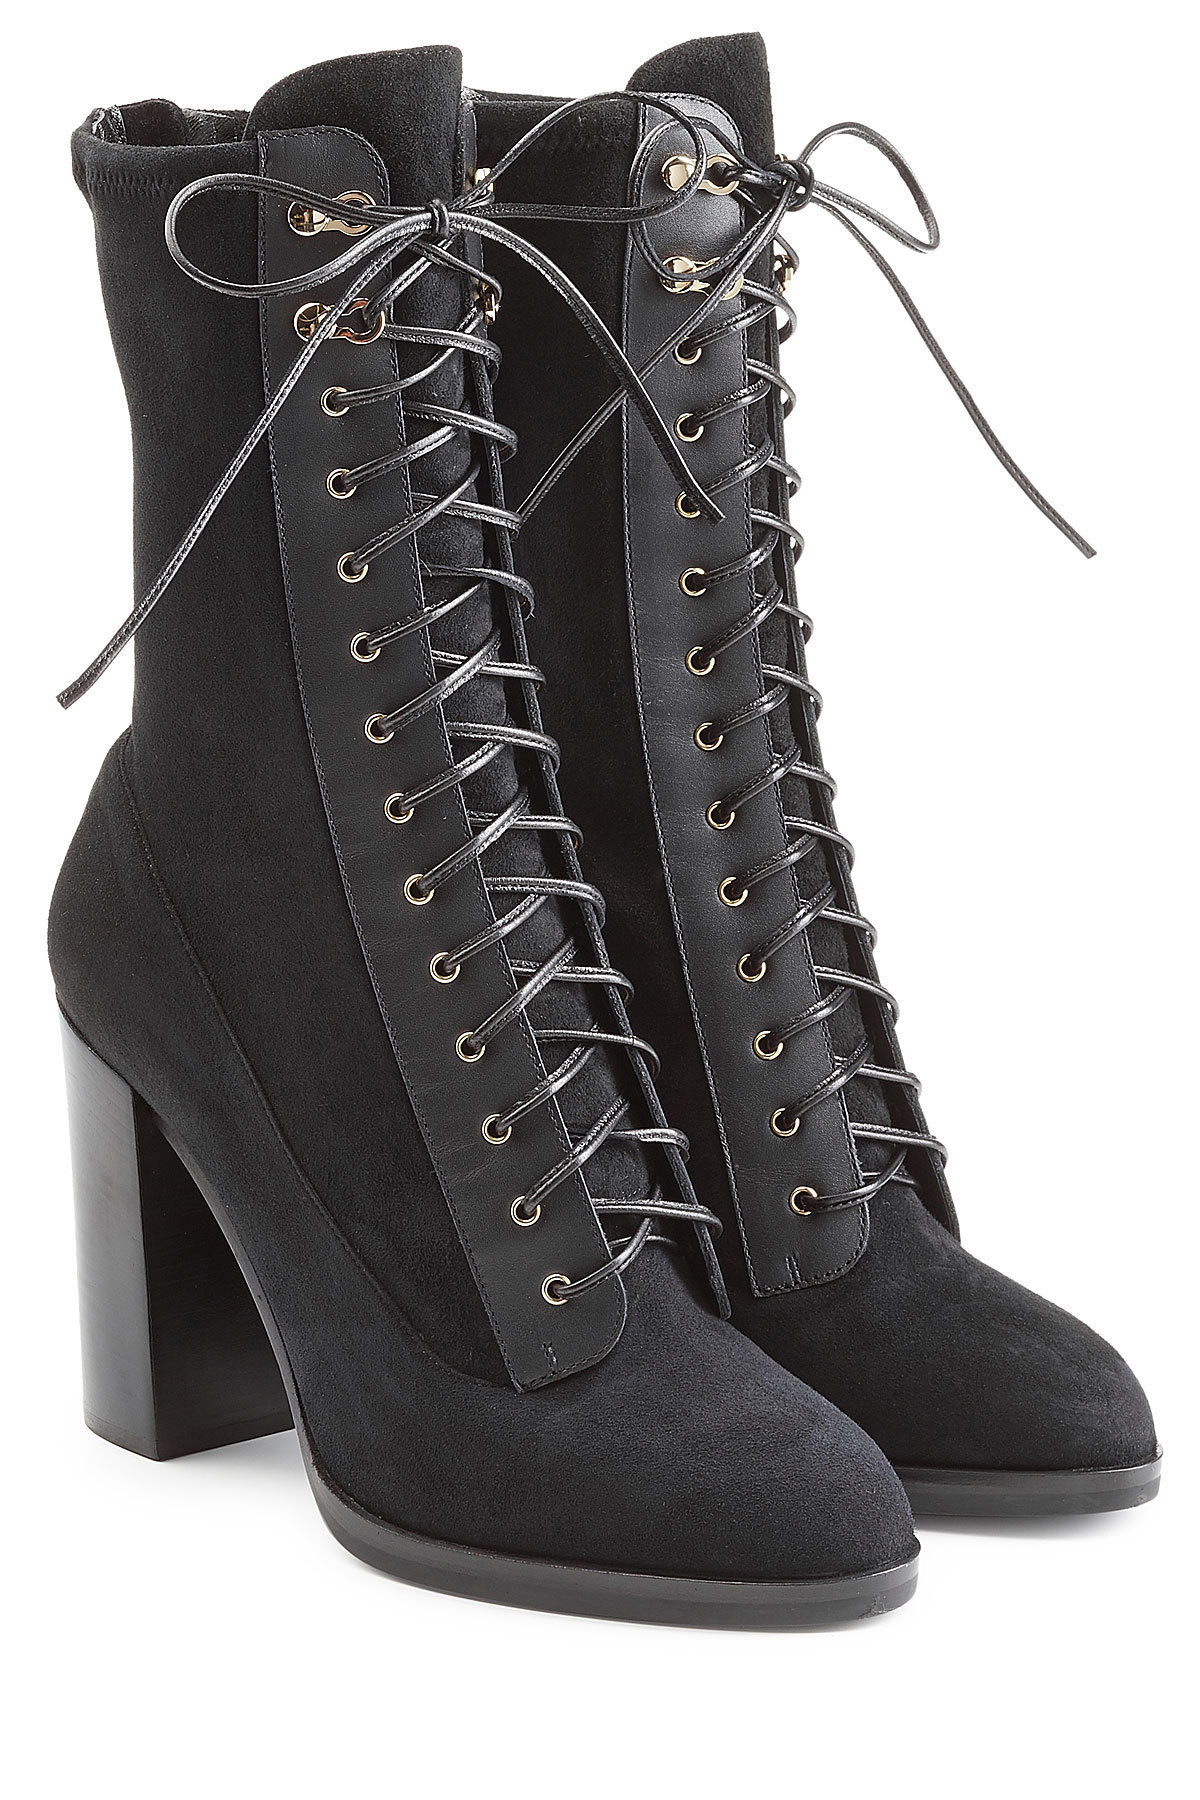 Sergio Rossi - Lace Up Suede Boots